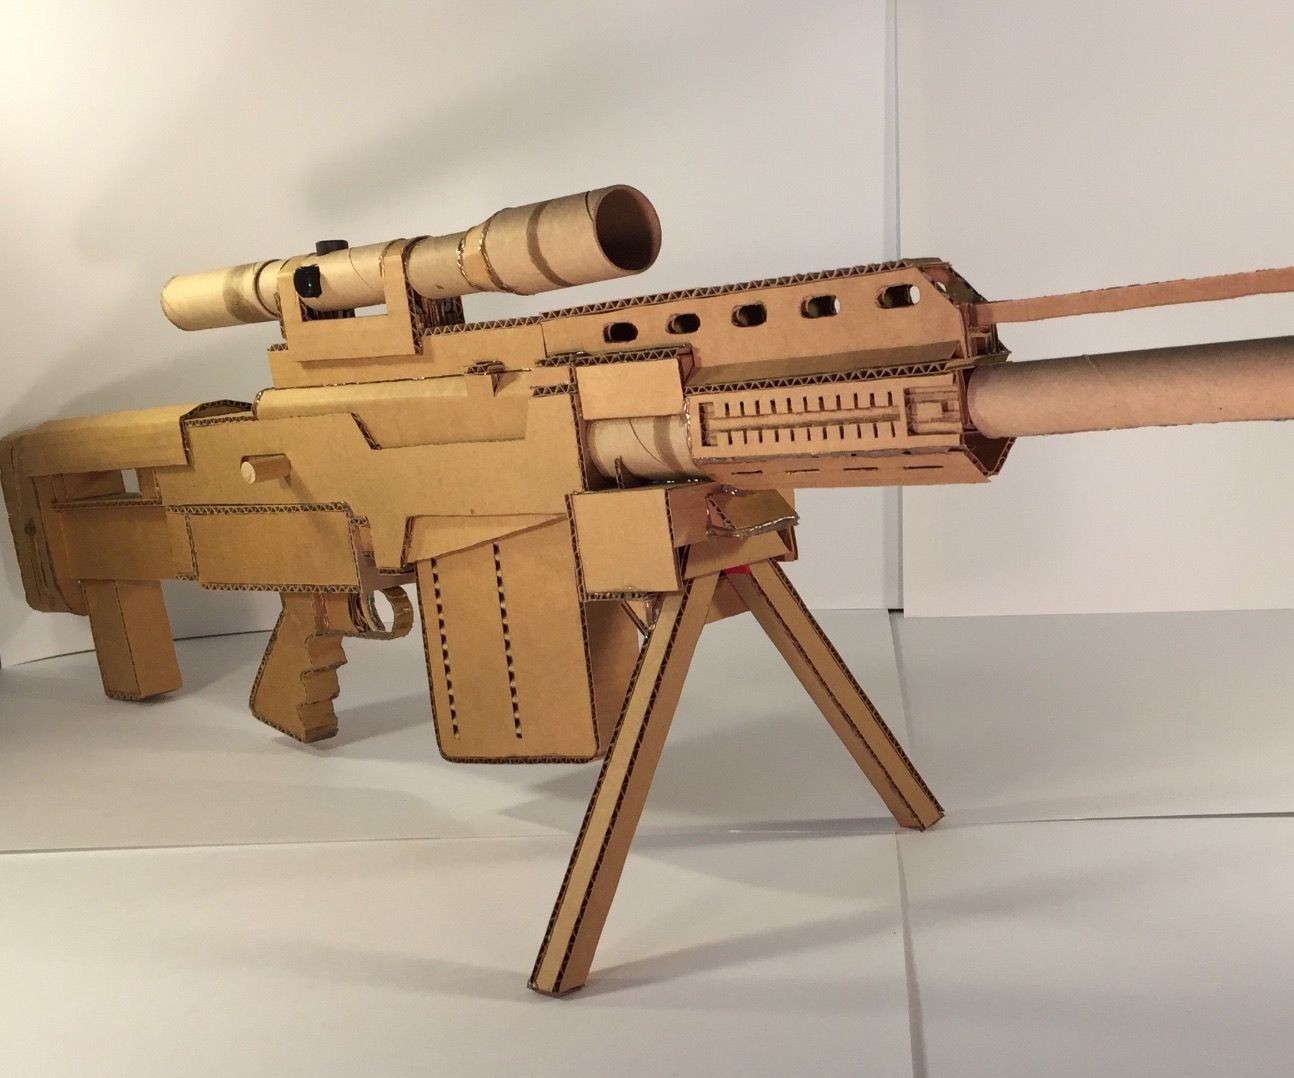 weapon-papercraft-fully-functioning-cardboard-as-50-sniper-rifle